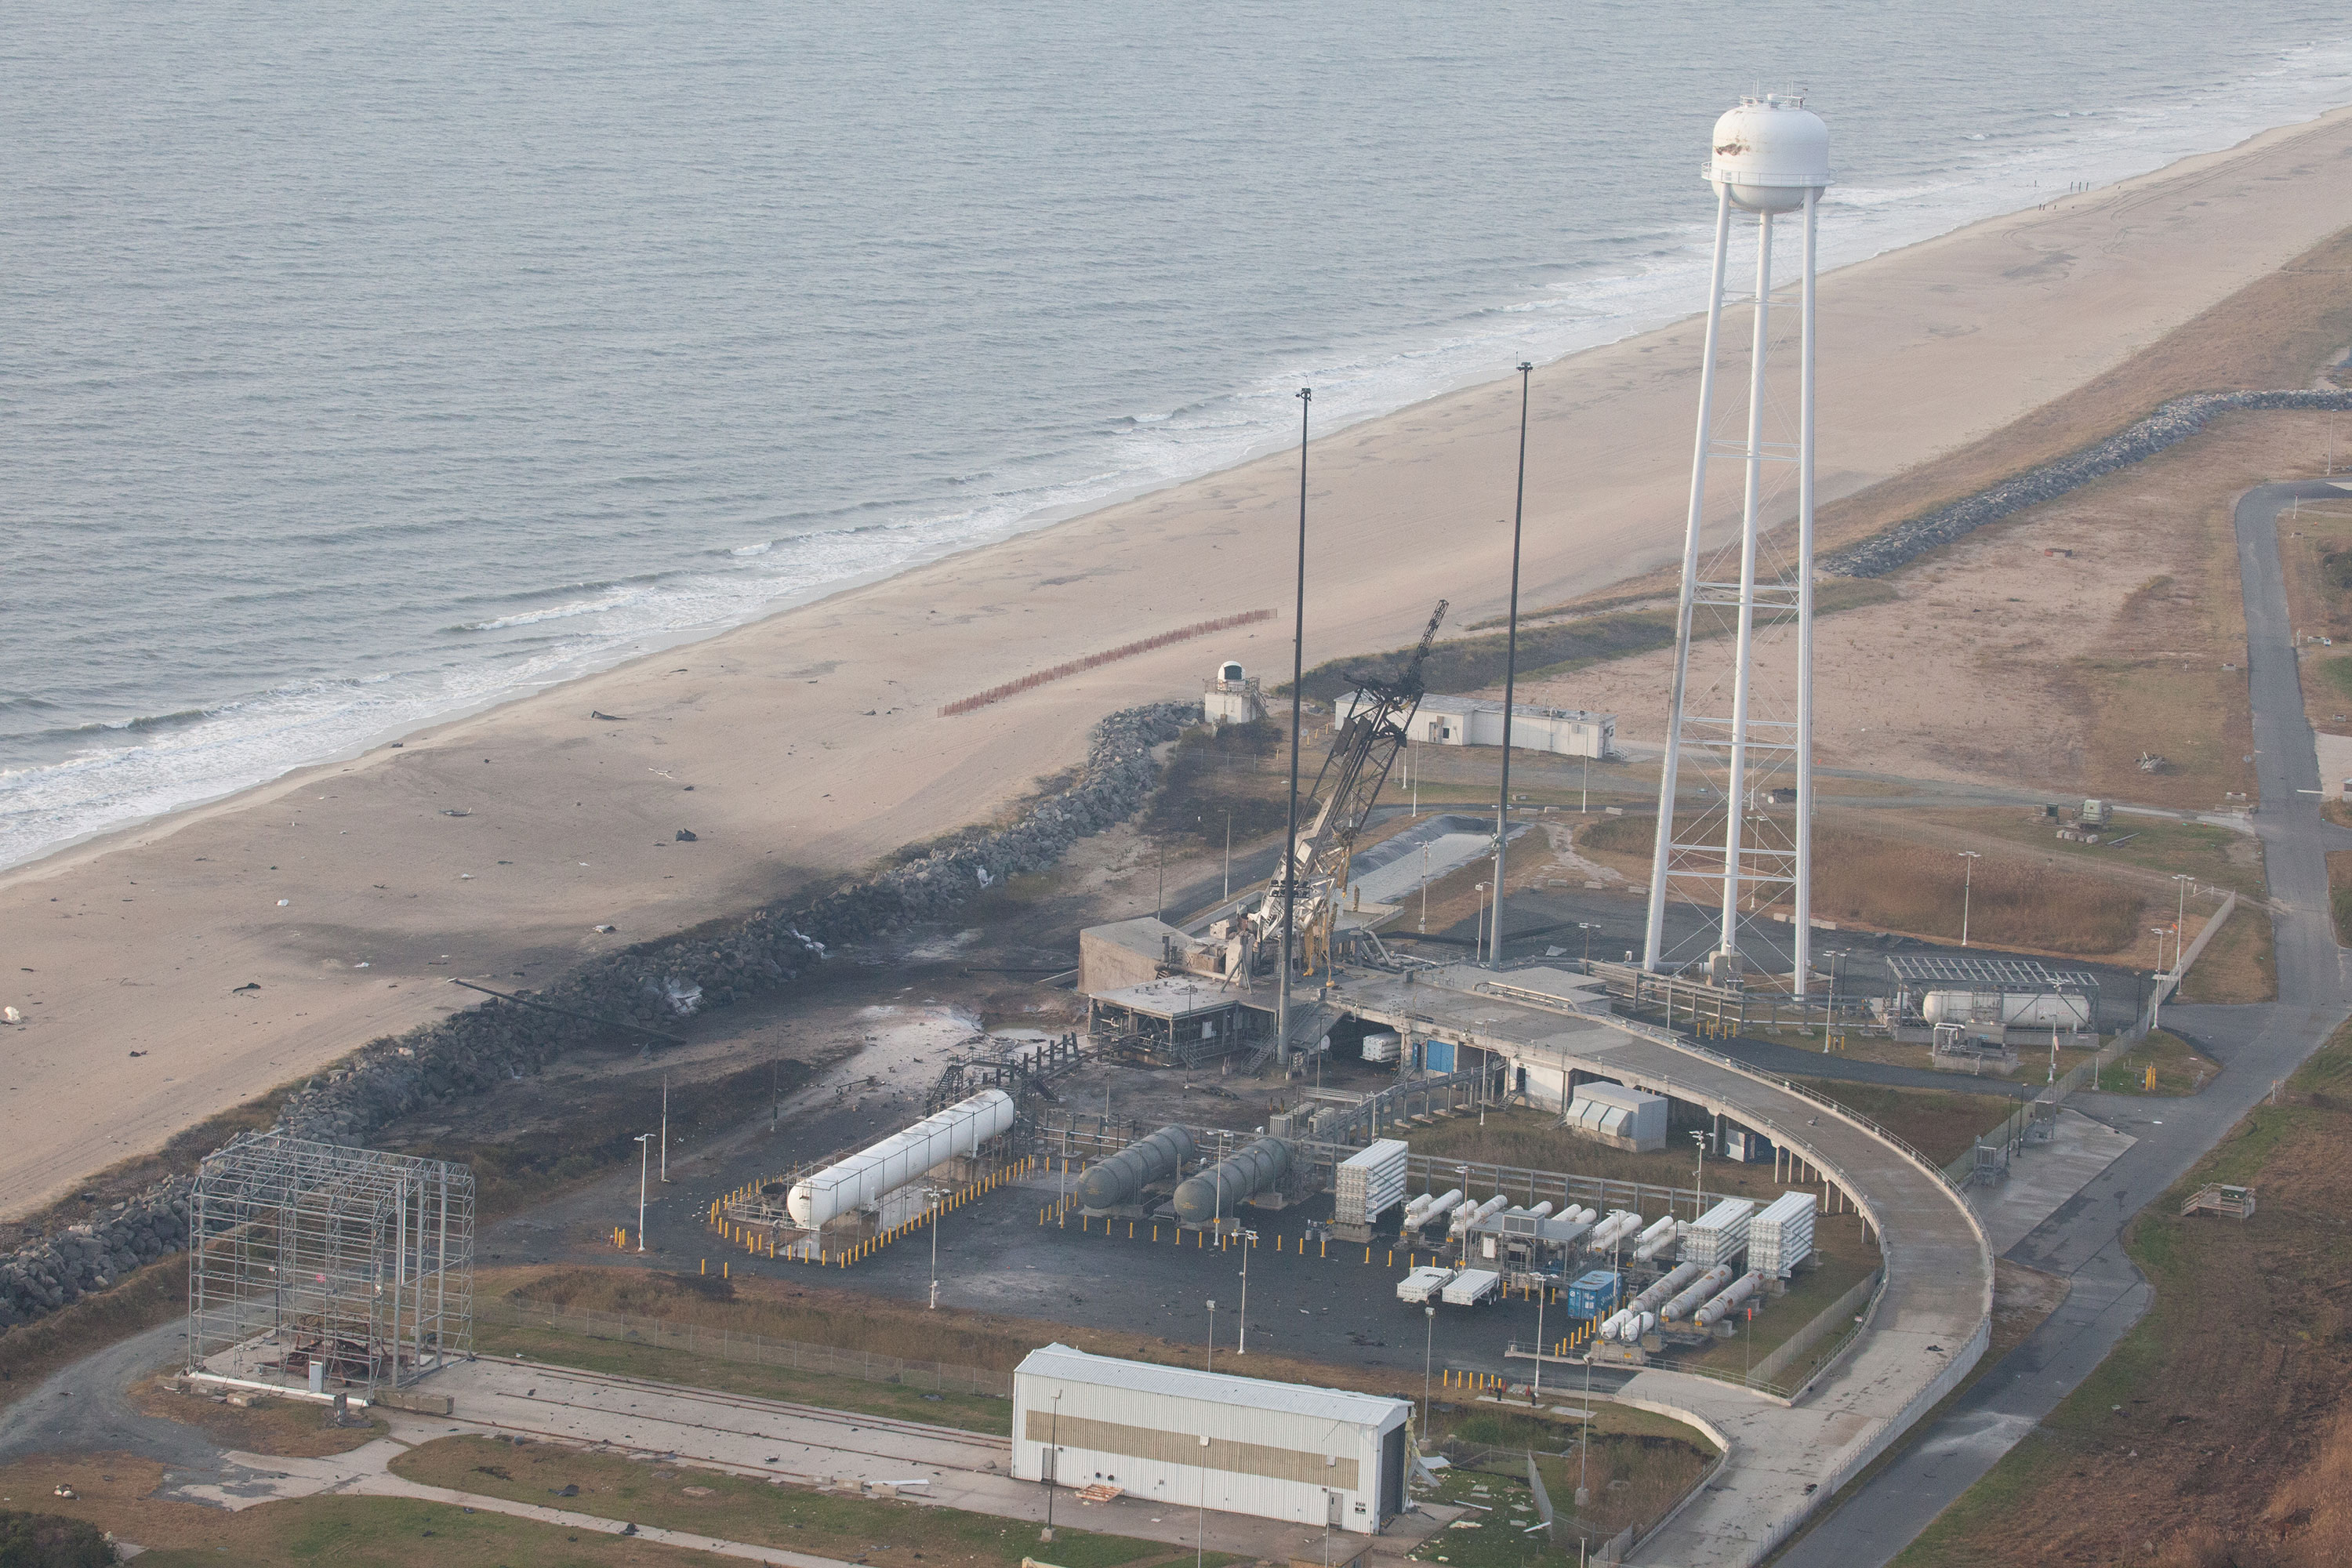 An aerial view of the Wallops Island launch facilities taken by the Wallops Incident Response Team Oct. 29, 2014, following the failed launch attempt of Orbital Science Corp.'s Antares rocket Oct. 28. Photo Credit: NASA/Terry Zaperach 